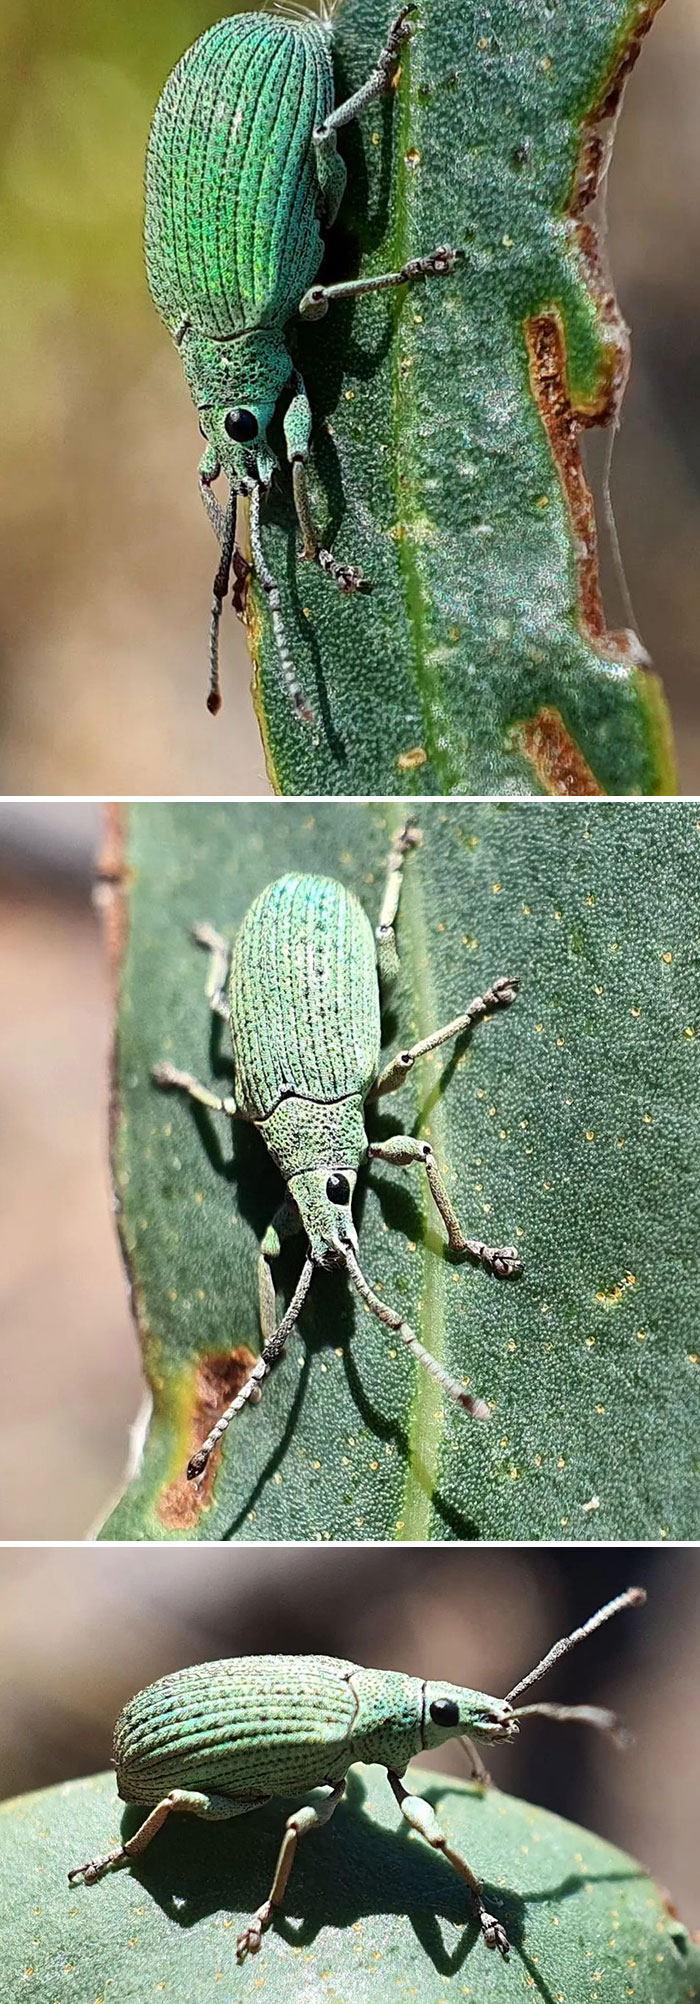 Such A Pretty Green Weevil